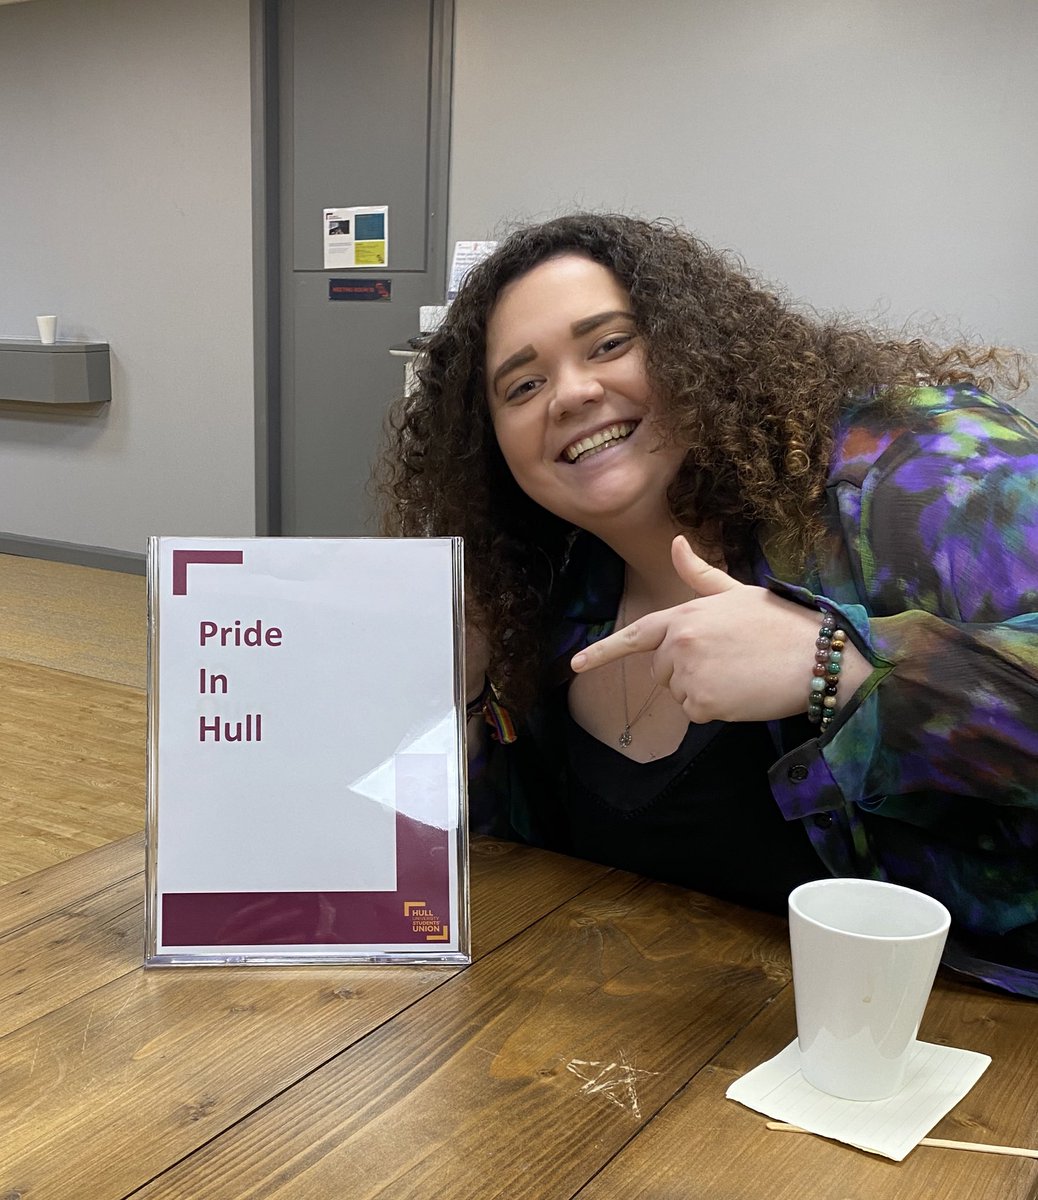 Great to visit @HullUniUnion last night with @AliceGodber for @prideinhull talking #creativenetwork and students getting involved. Also wonderful to see @FreedomFestHull @AbsCultured @BTOHull @thedeephull there also!